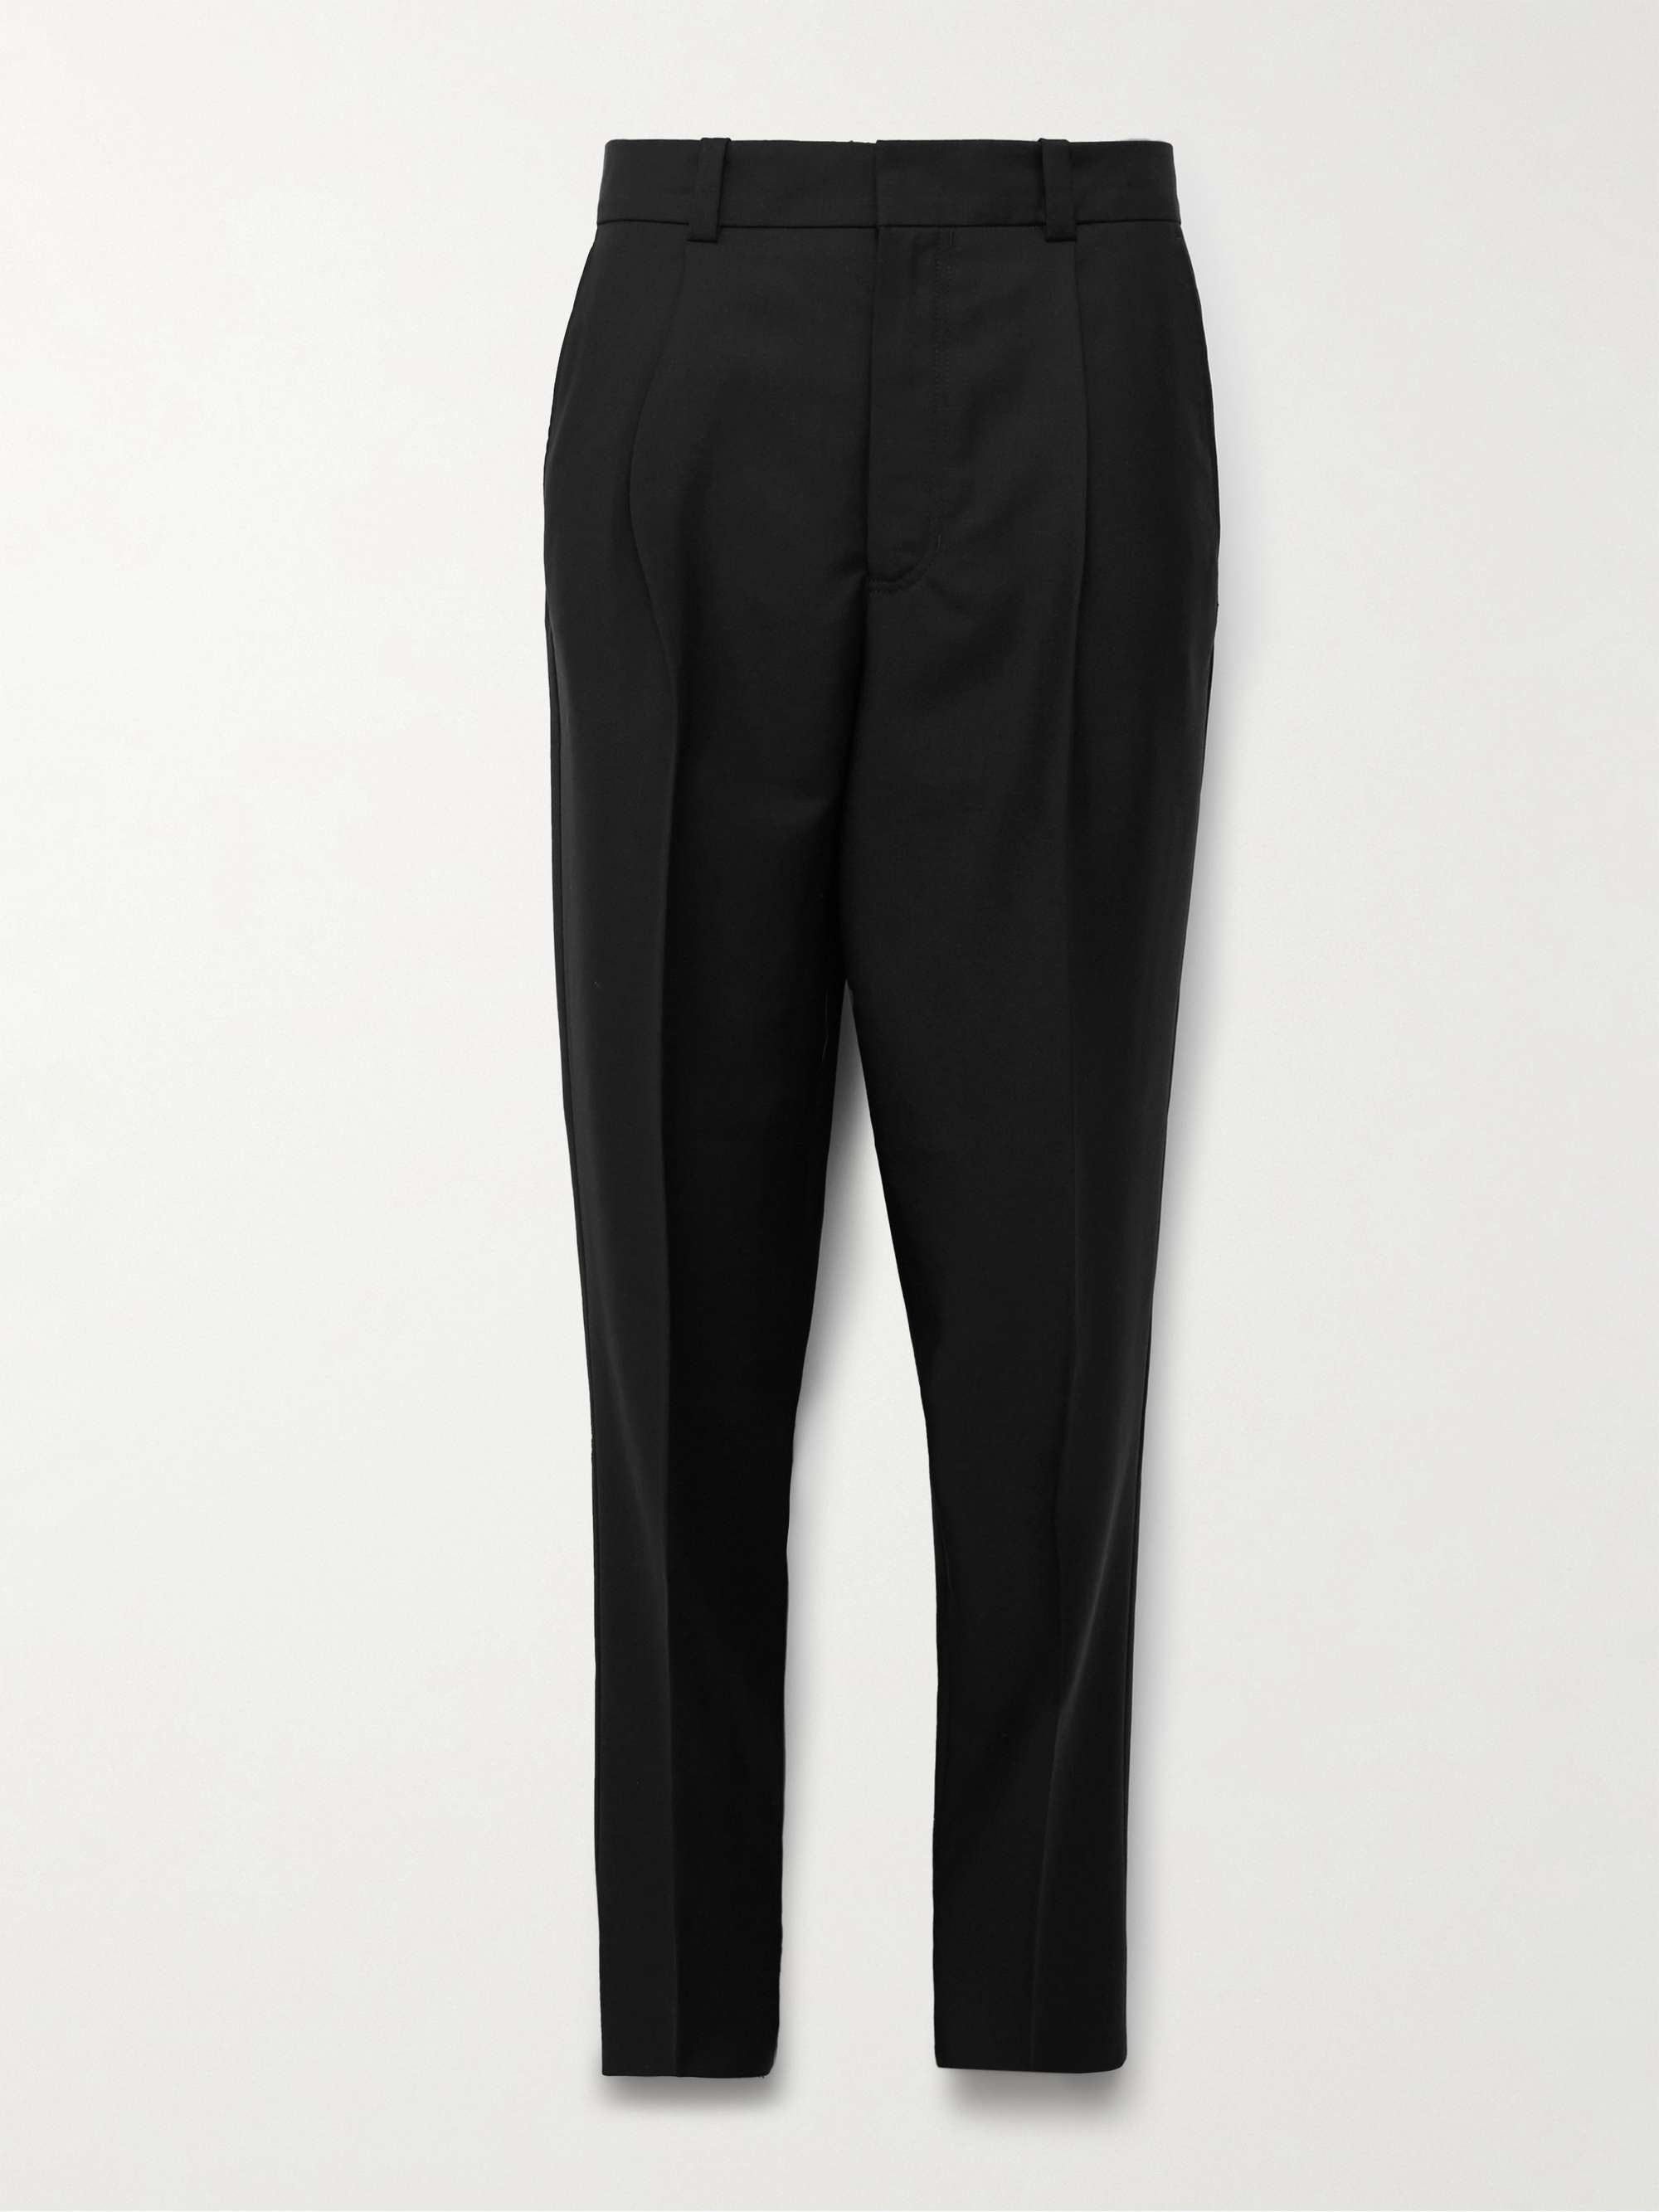 ACNE STUDIOS Porter Slim-Fit Pleated Wool and Mohair-Blend Trousers for Men